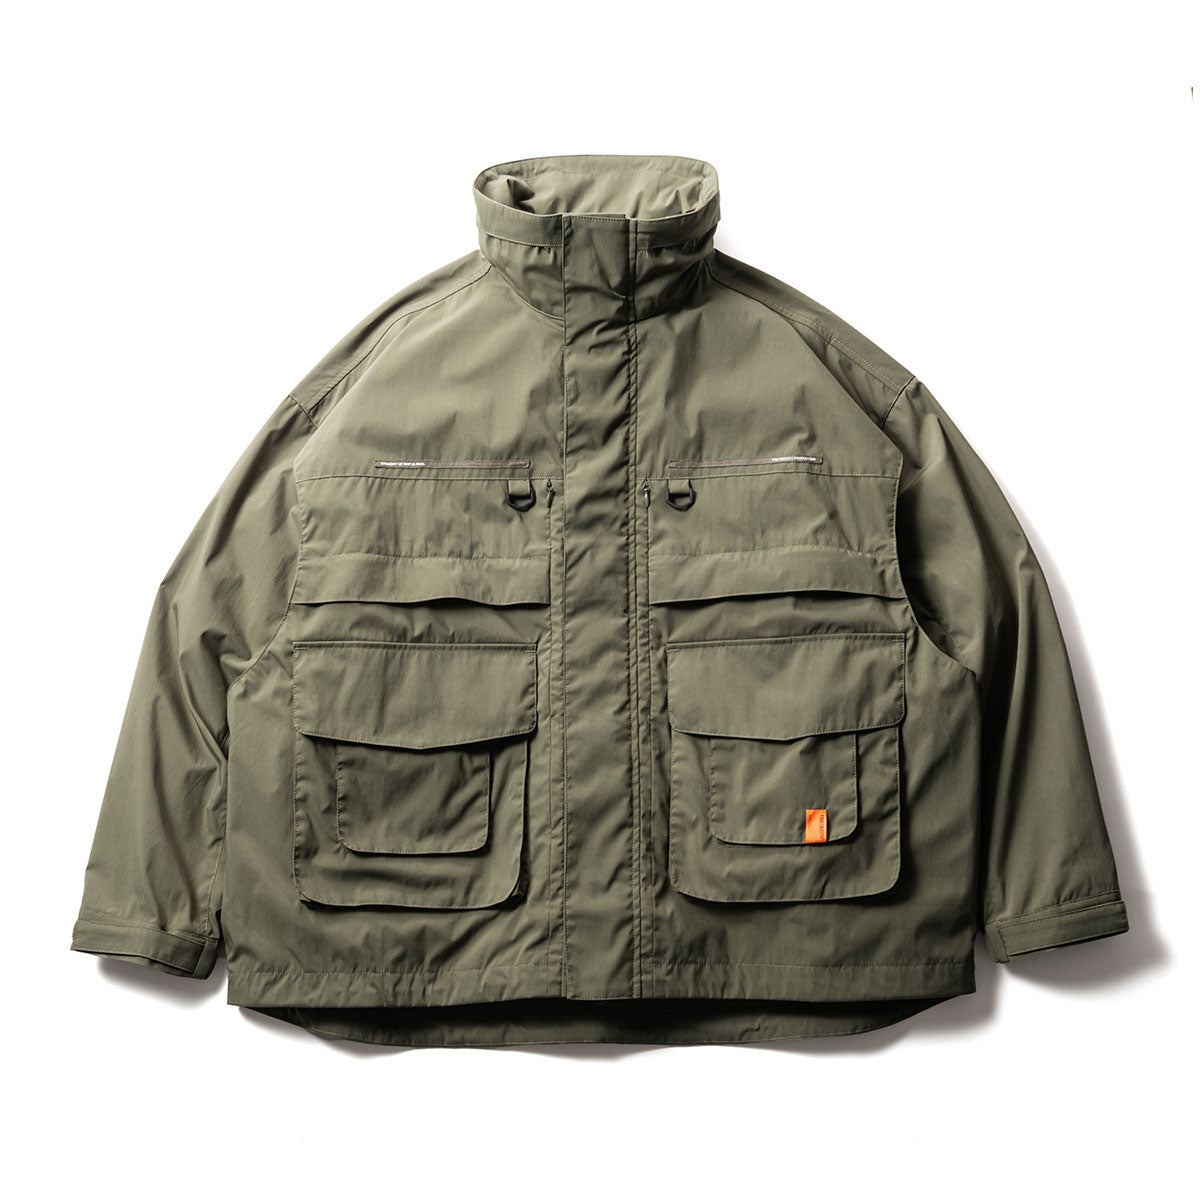 TACTICAL LAYERED JKT – Why are you here?